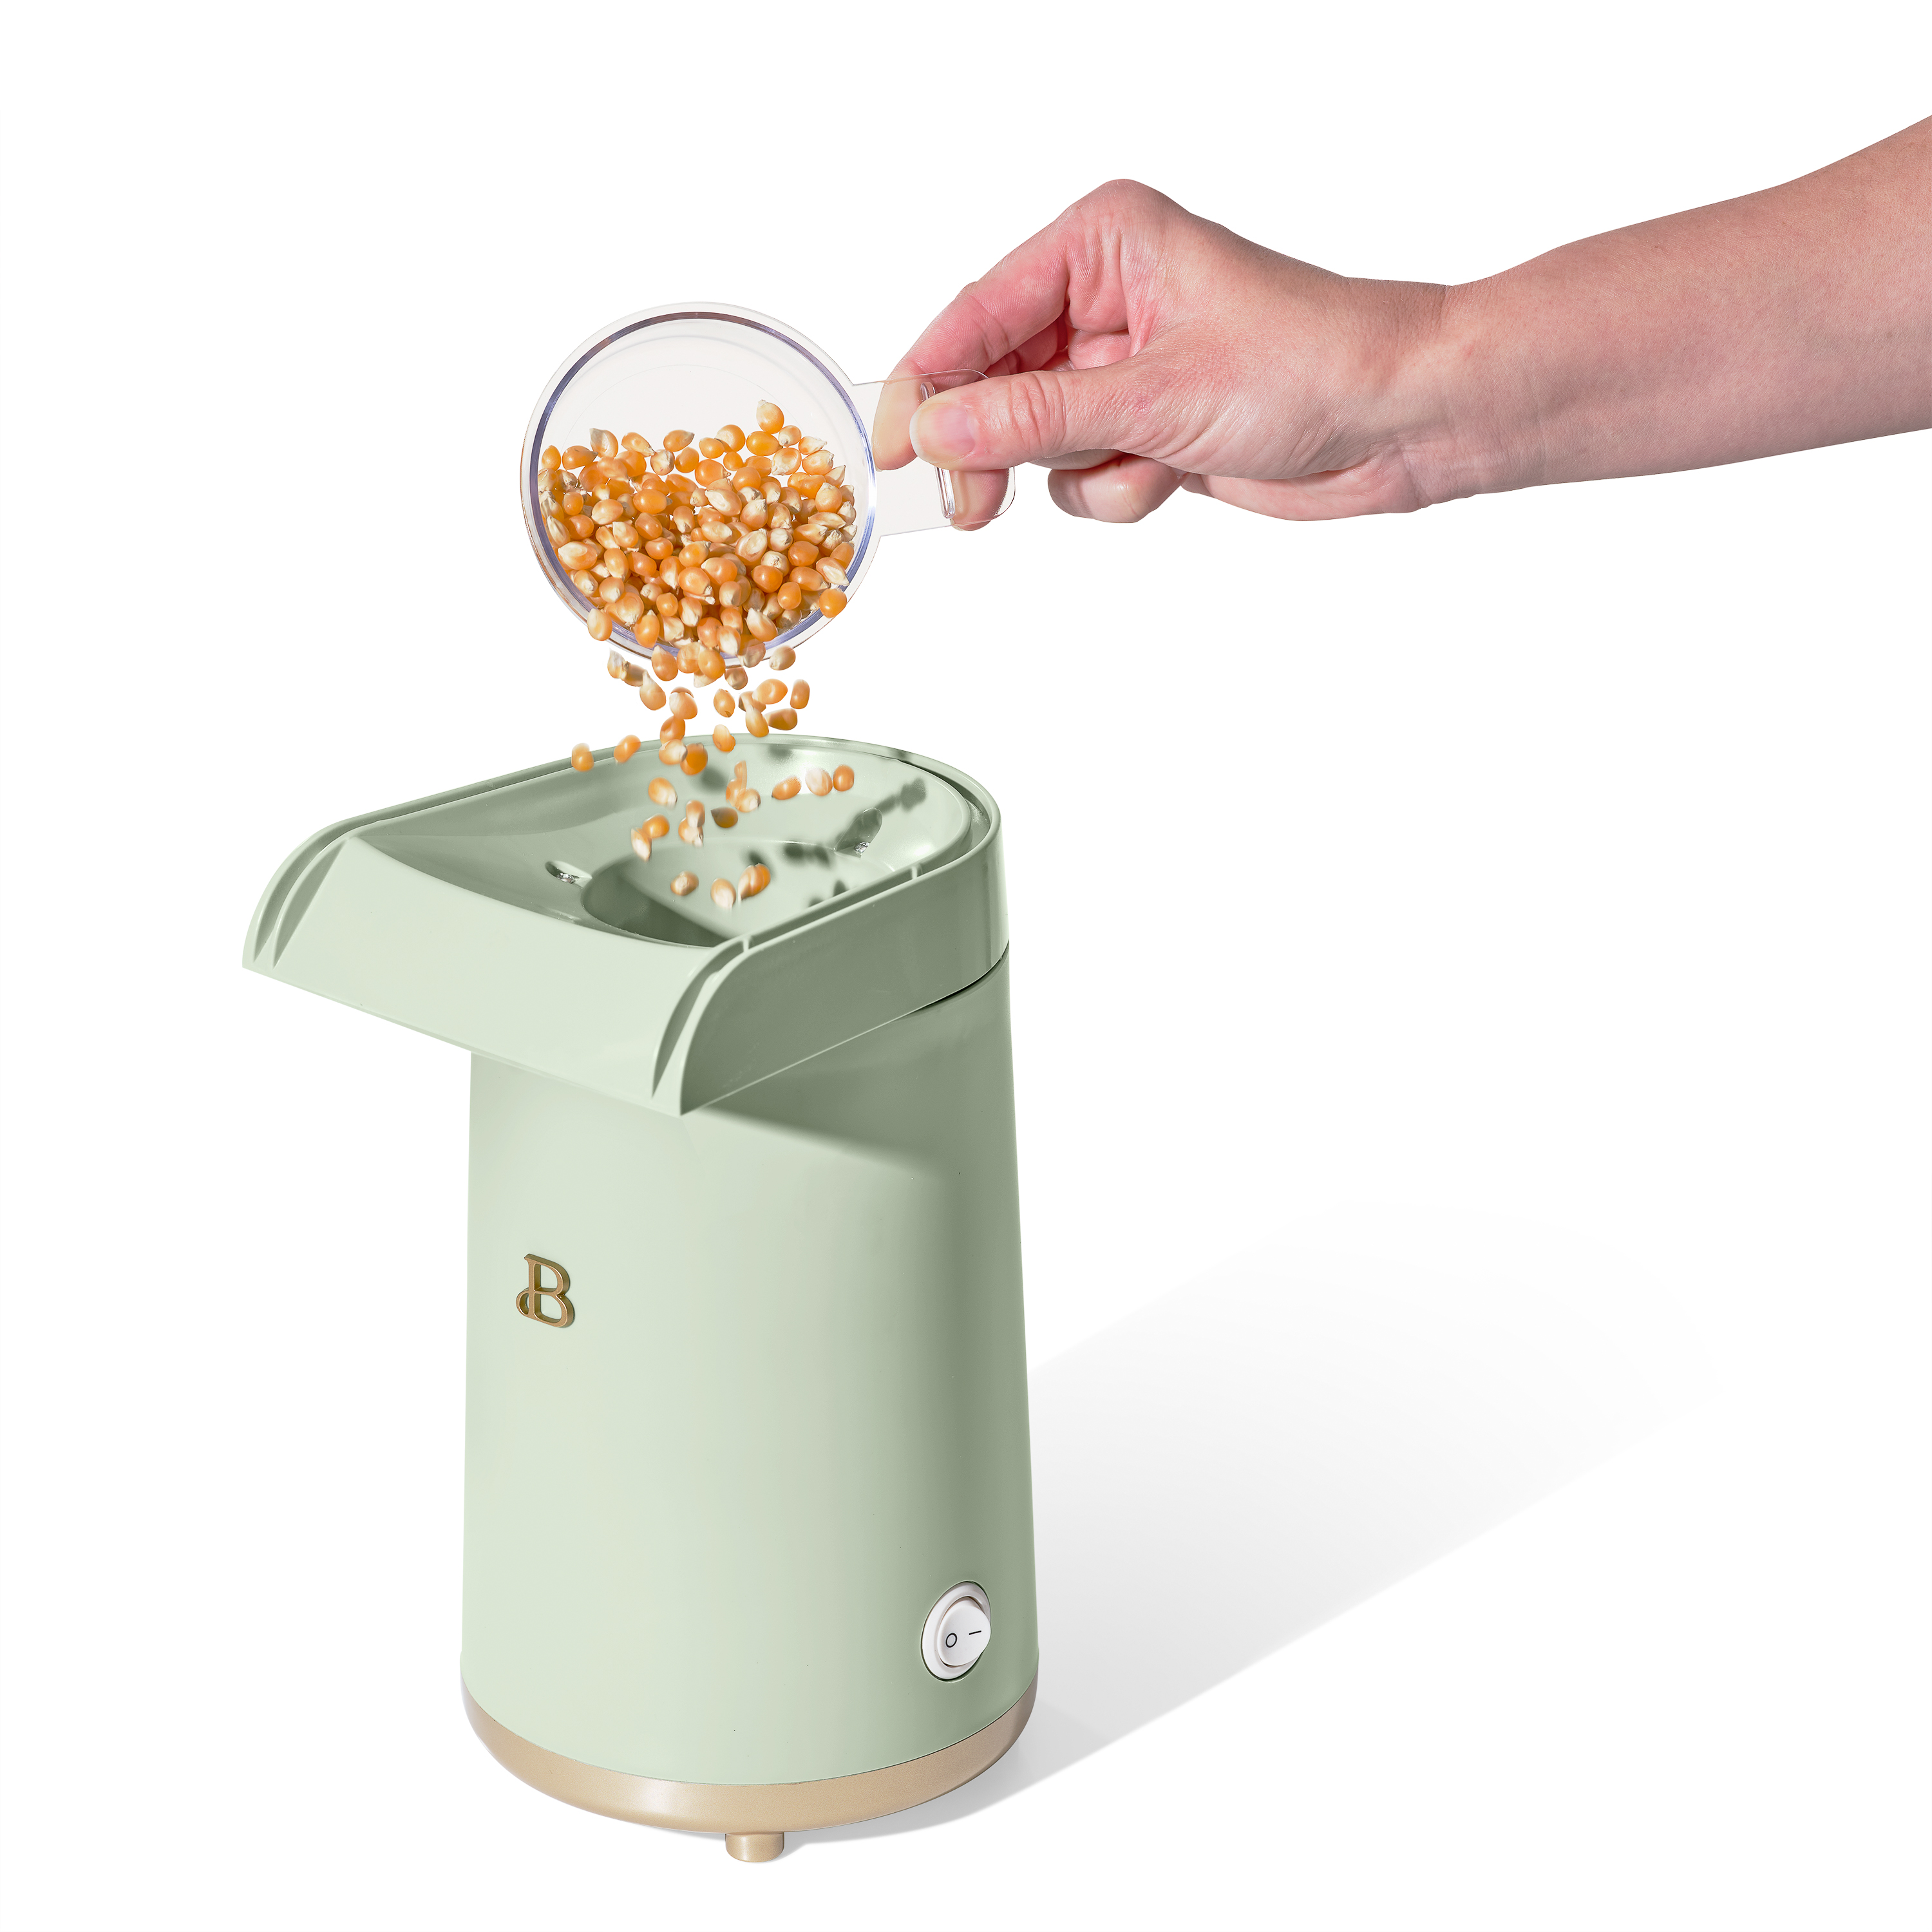 Beautiful 16 Cup Hot Air Electric Popcorn Maker, Sage Green by Drew Barrymore - image 12 of 13